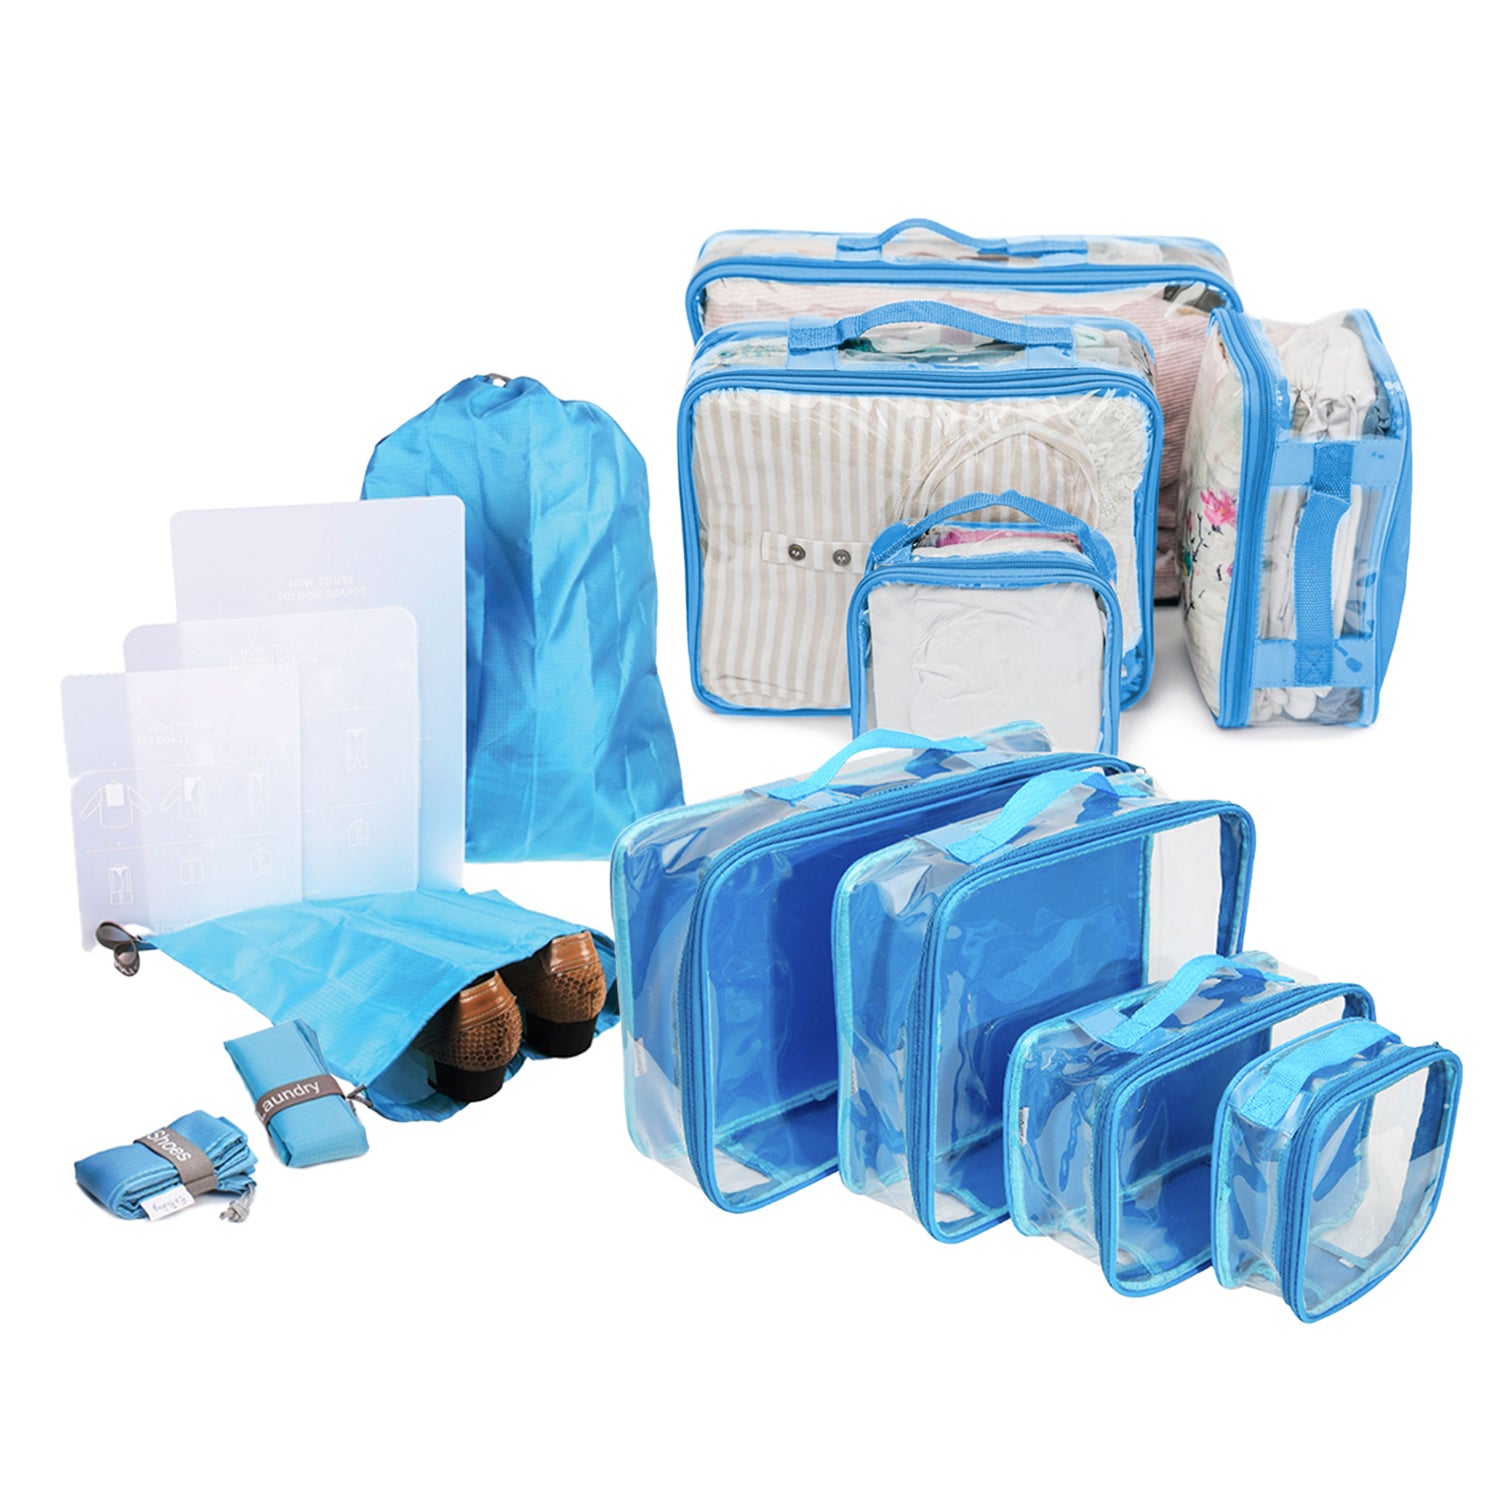 Travel Luggage Packing Organizer, Packing Cubes, Luggage Organizer Bag,  Travel Bag for Packing, Luggage Cube, Suitcase Pouch, Laundry Pouch Travel